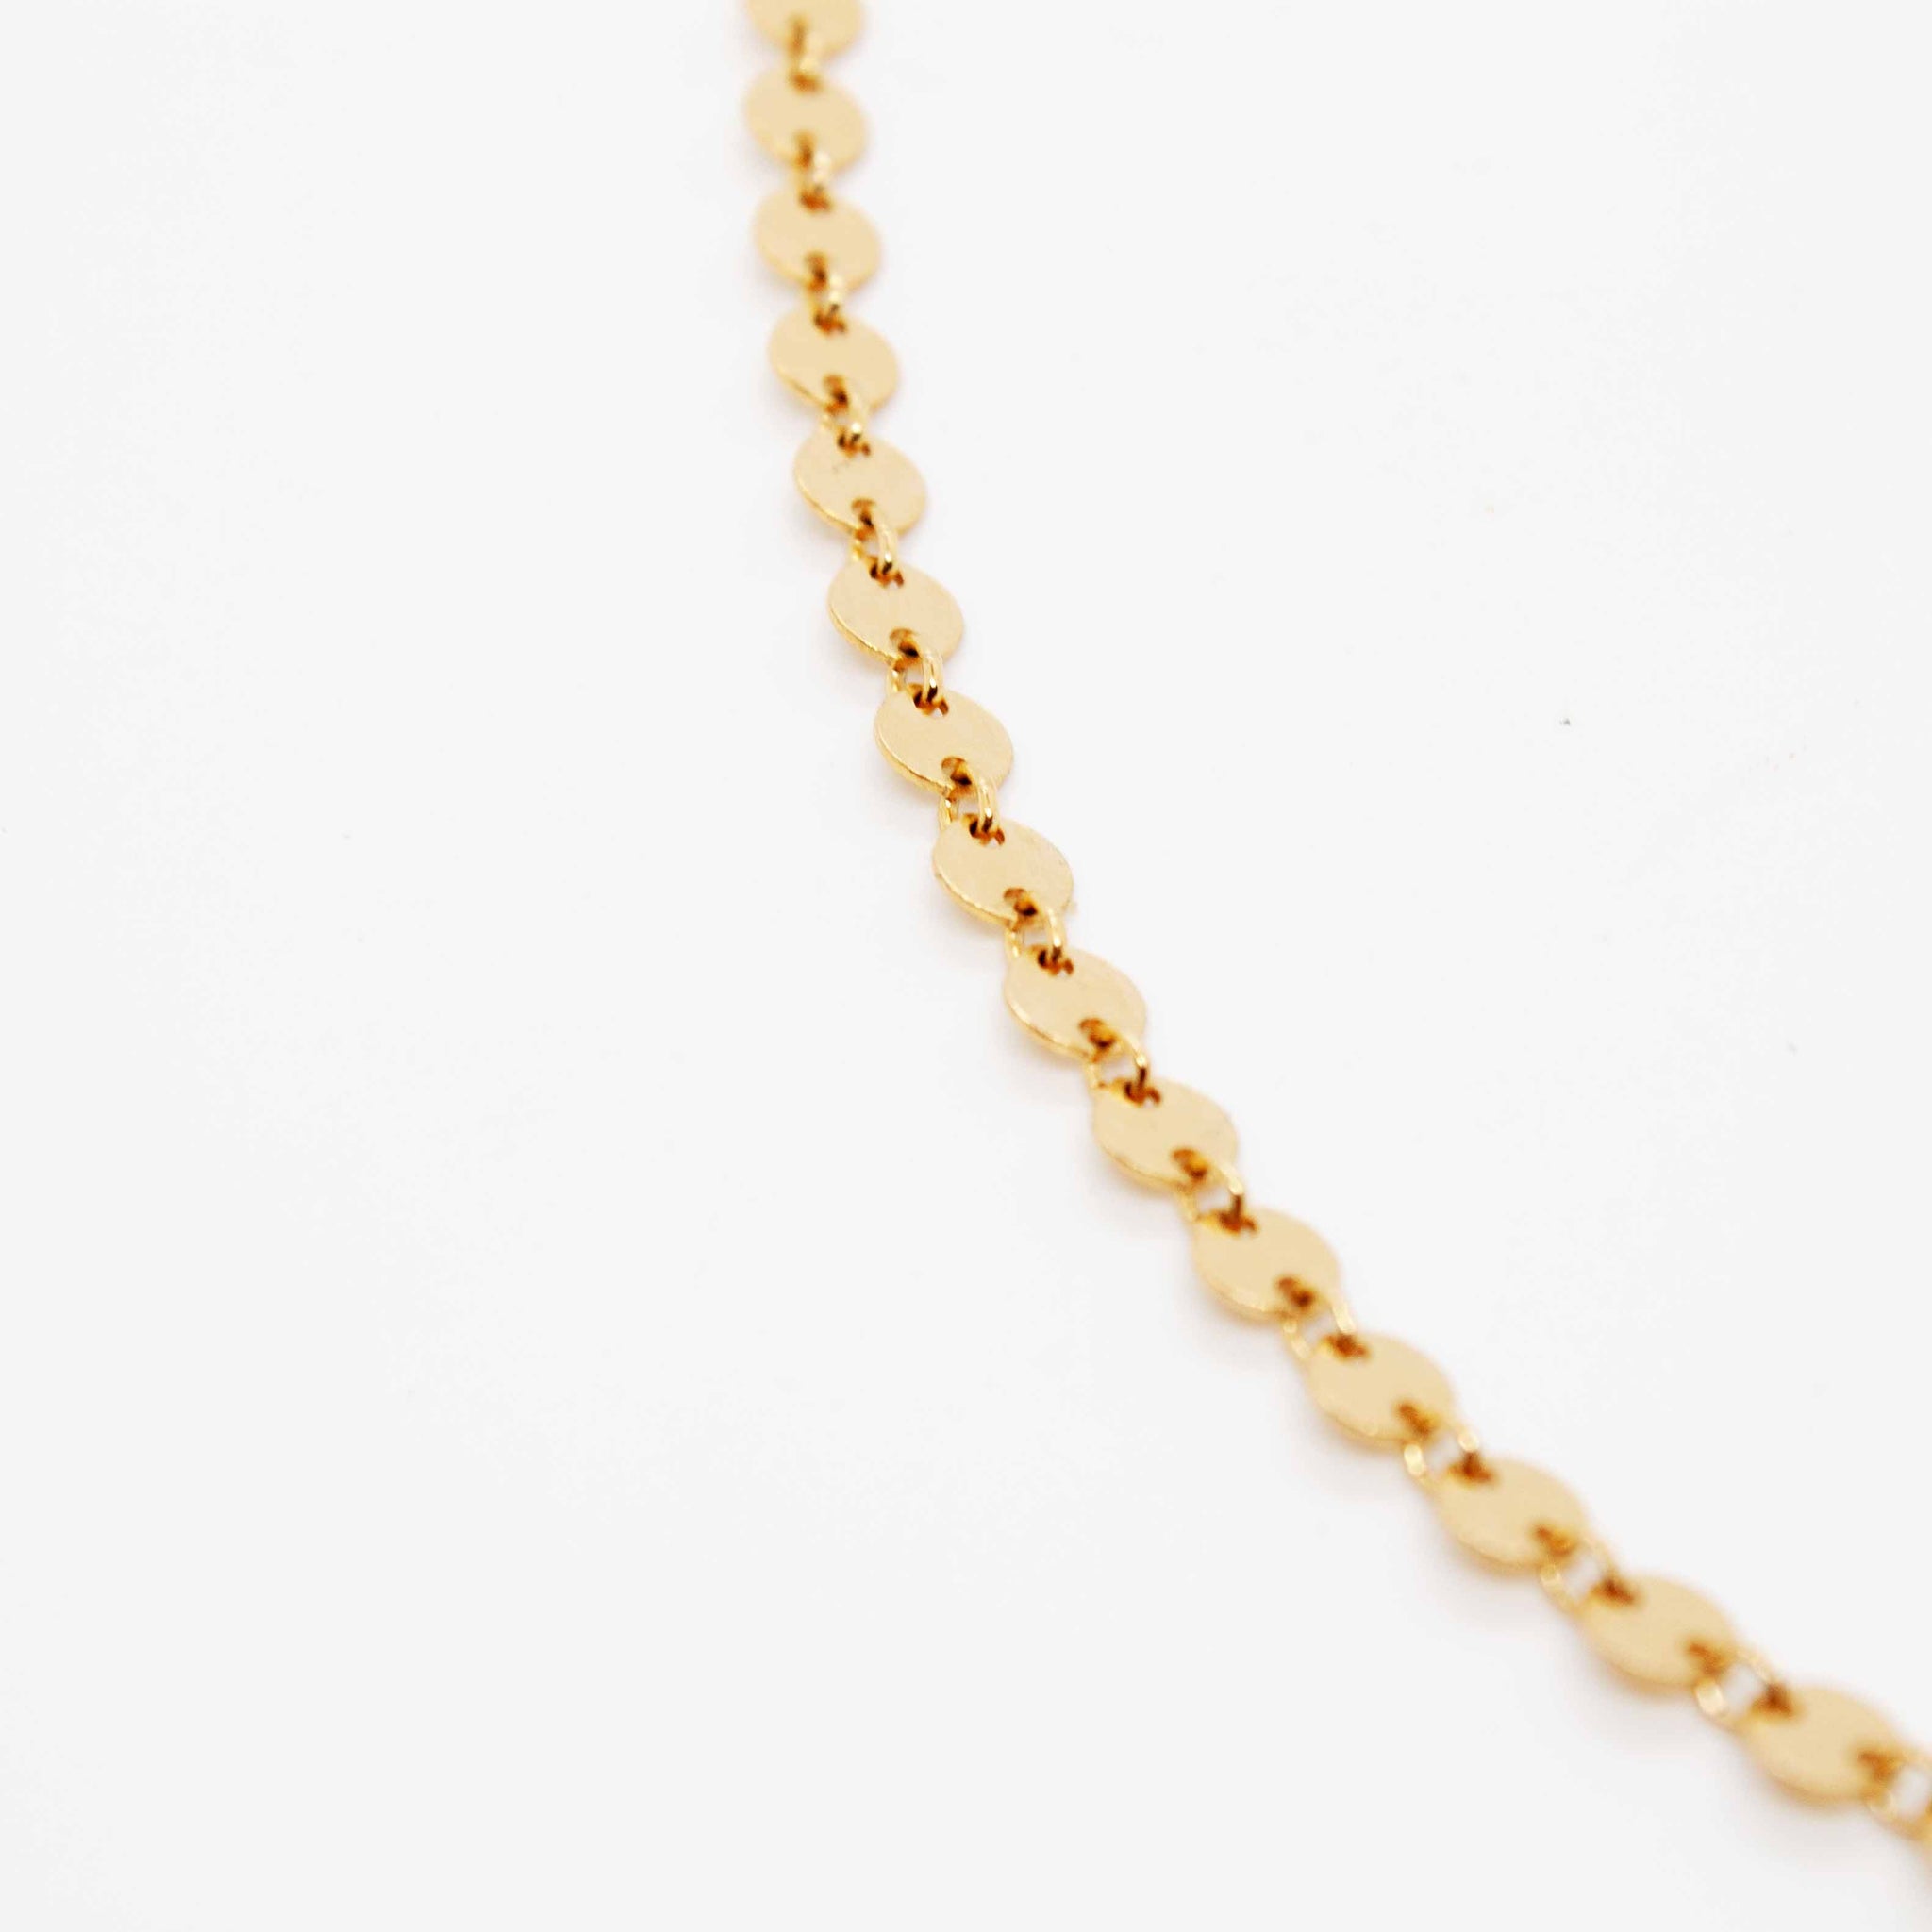 For LOVE of simplicity and classic elegance. 16 or 18 inch 14 karat gold filled* coin link chain. *Gold-filled jewelry is composed of a solid layer of gold, mechanically bonded to sterling silver. you are fine to shower in it, get it wet, wear it for life! kp jewelry co.